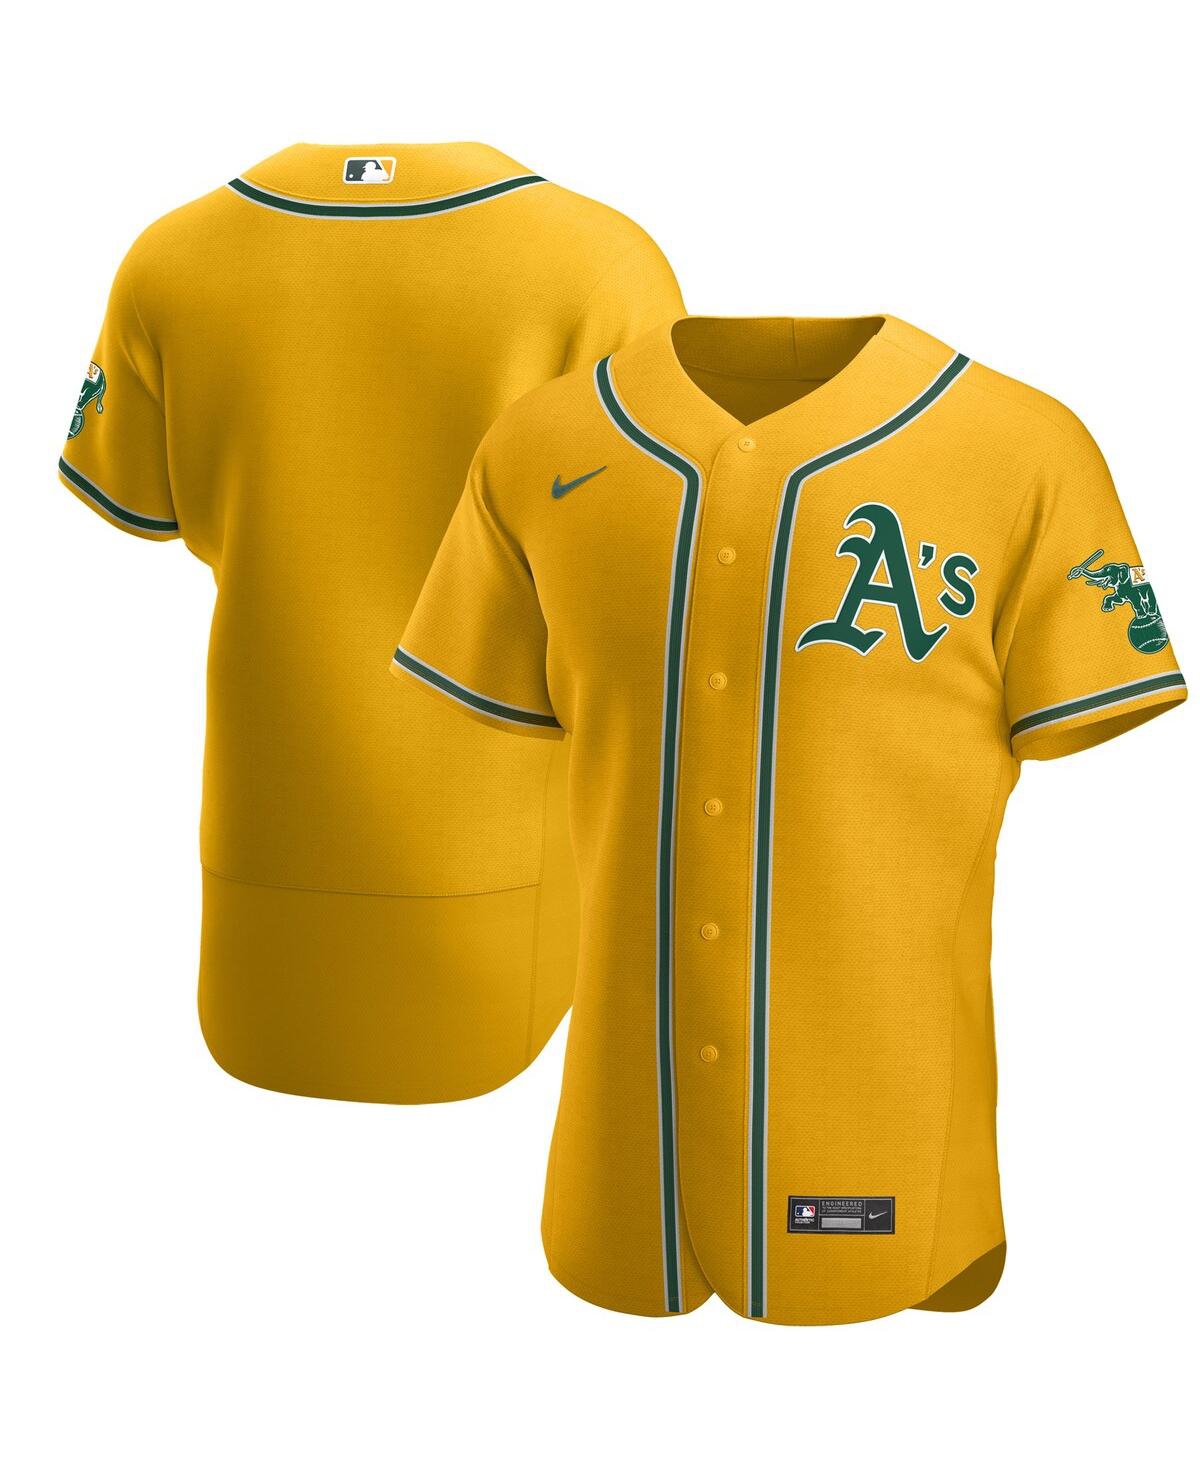 Men's Gold Oakland Athletics Authentic Official Team Jersey - Gold